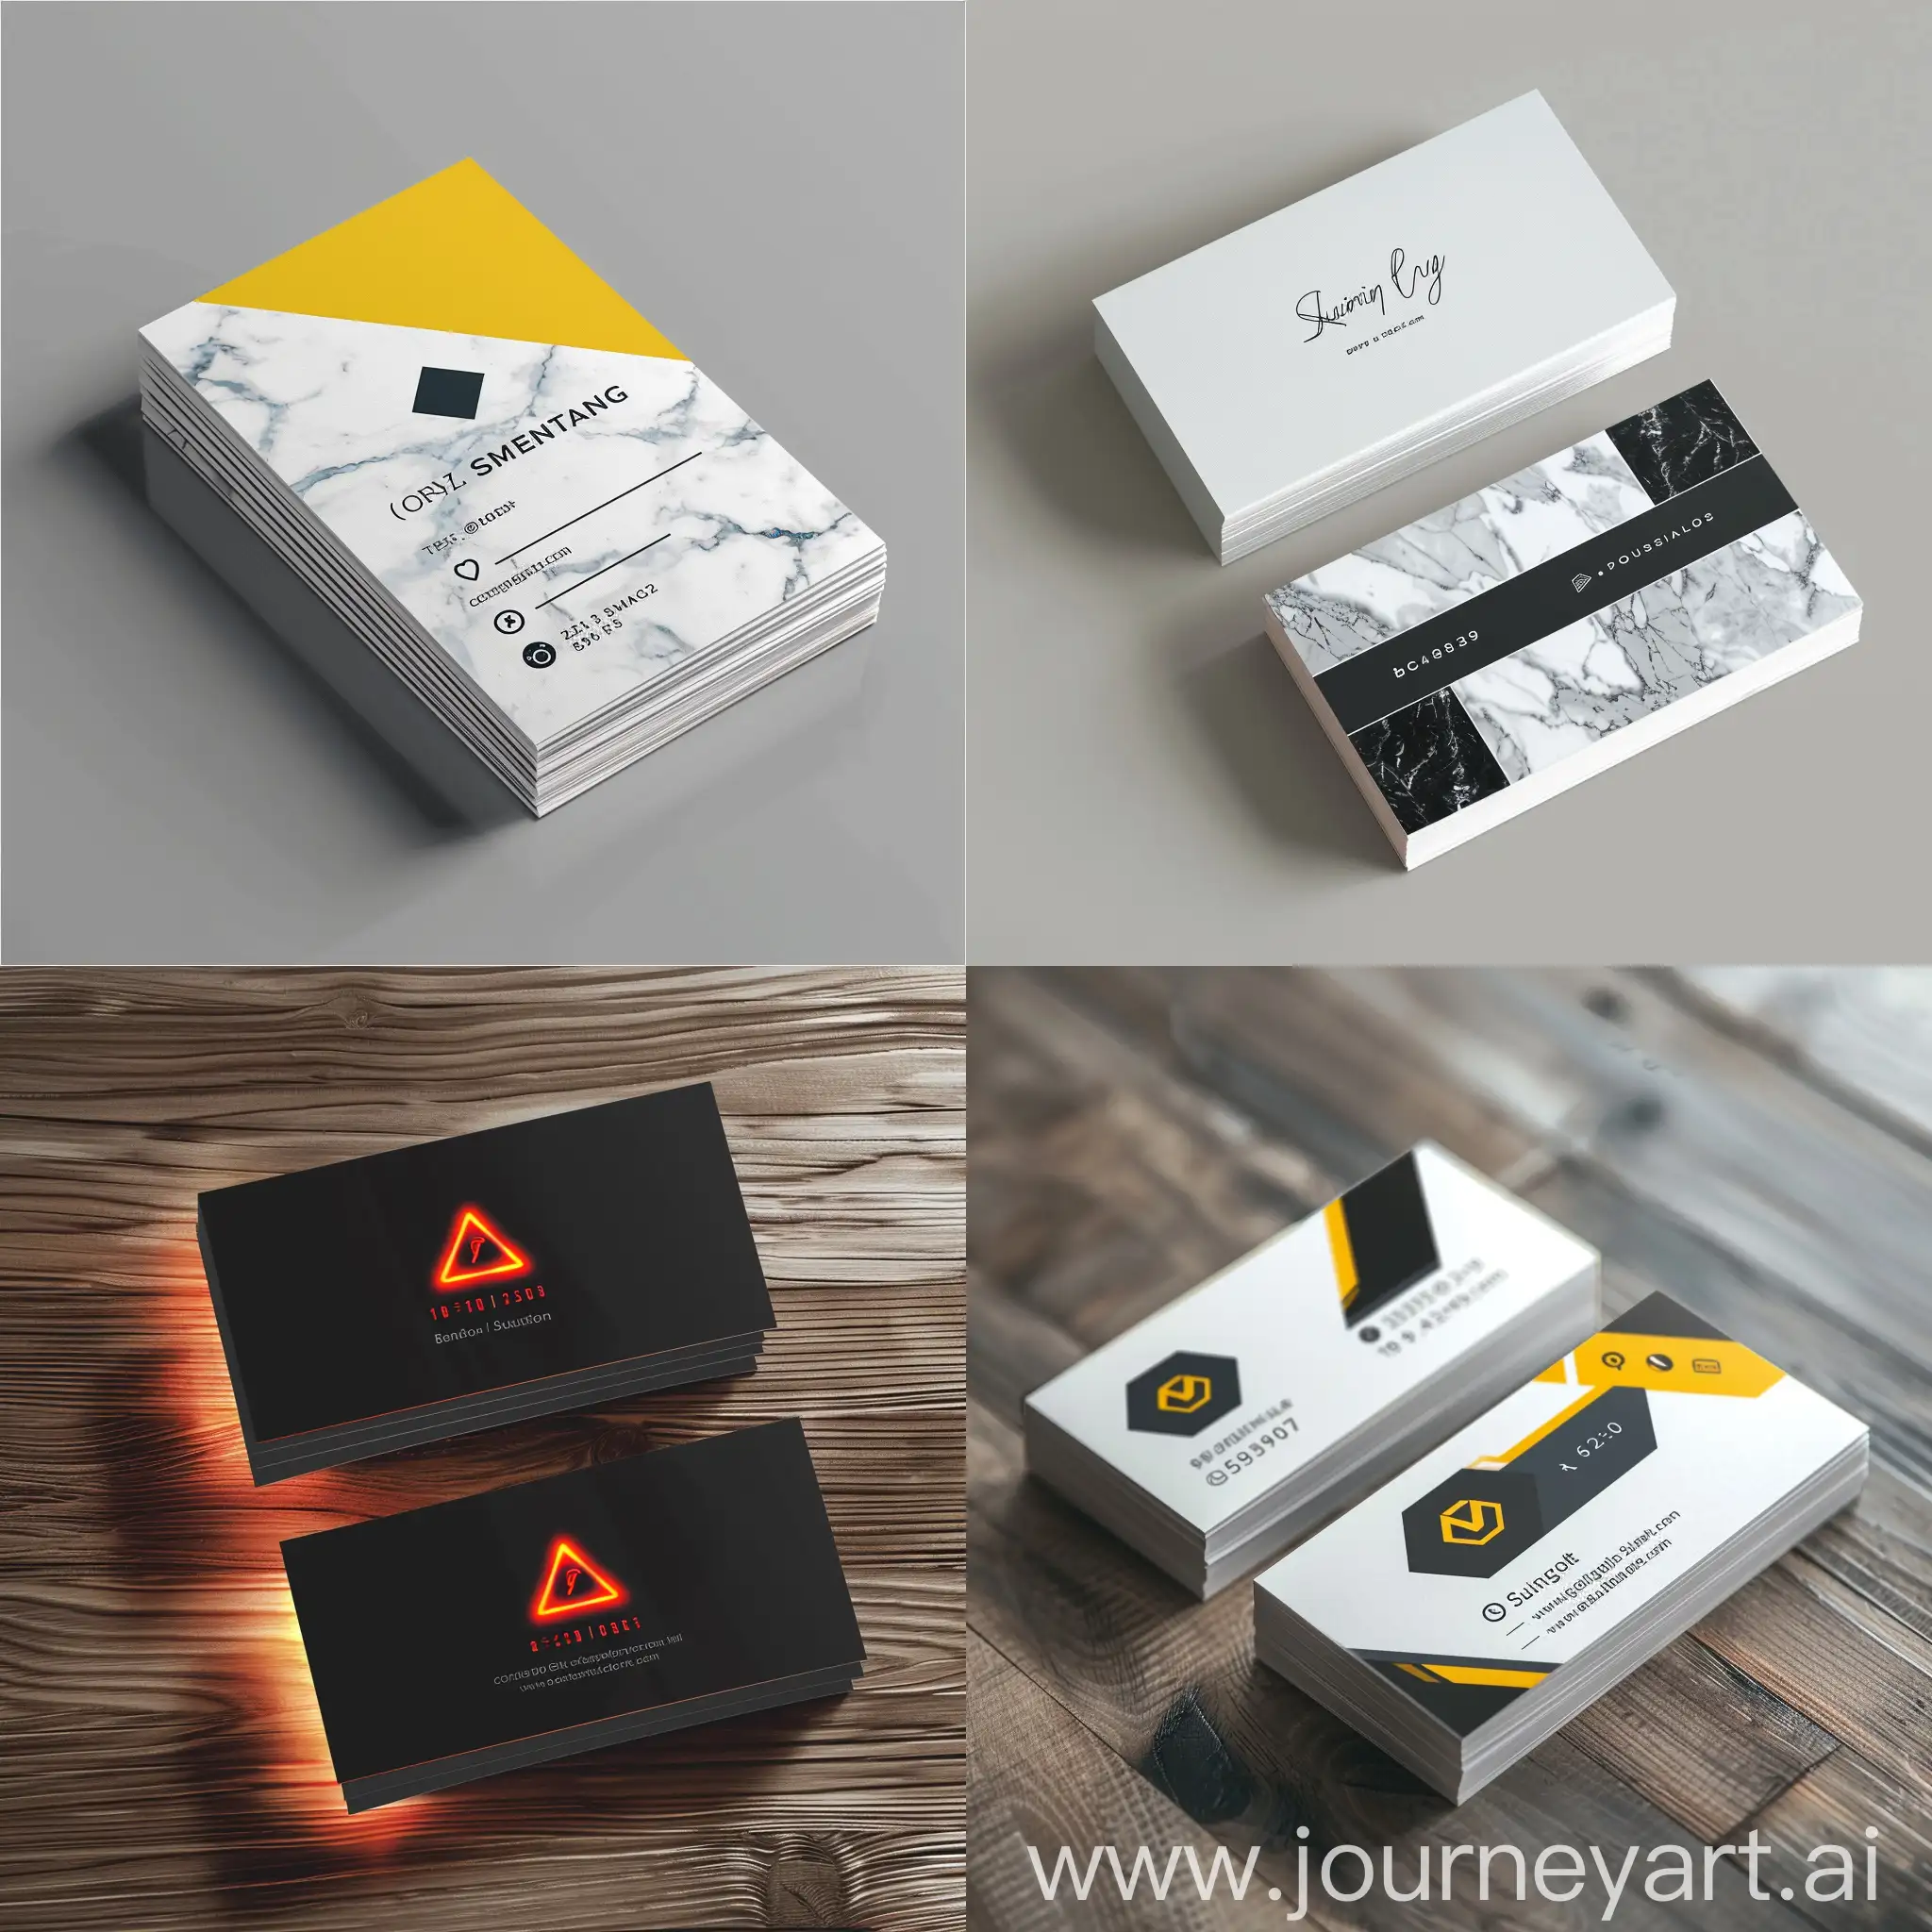 Business card design for an advertising agency